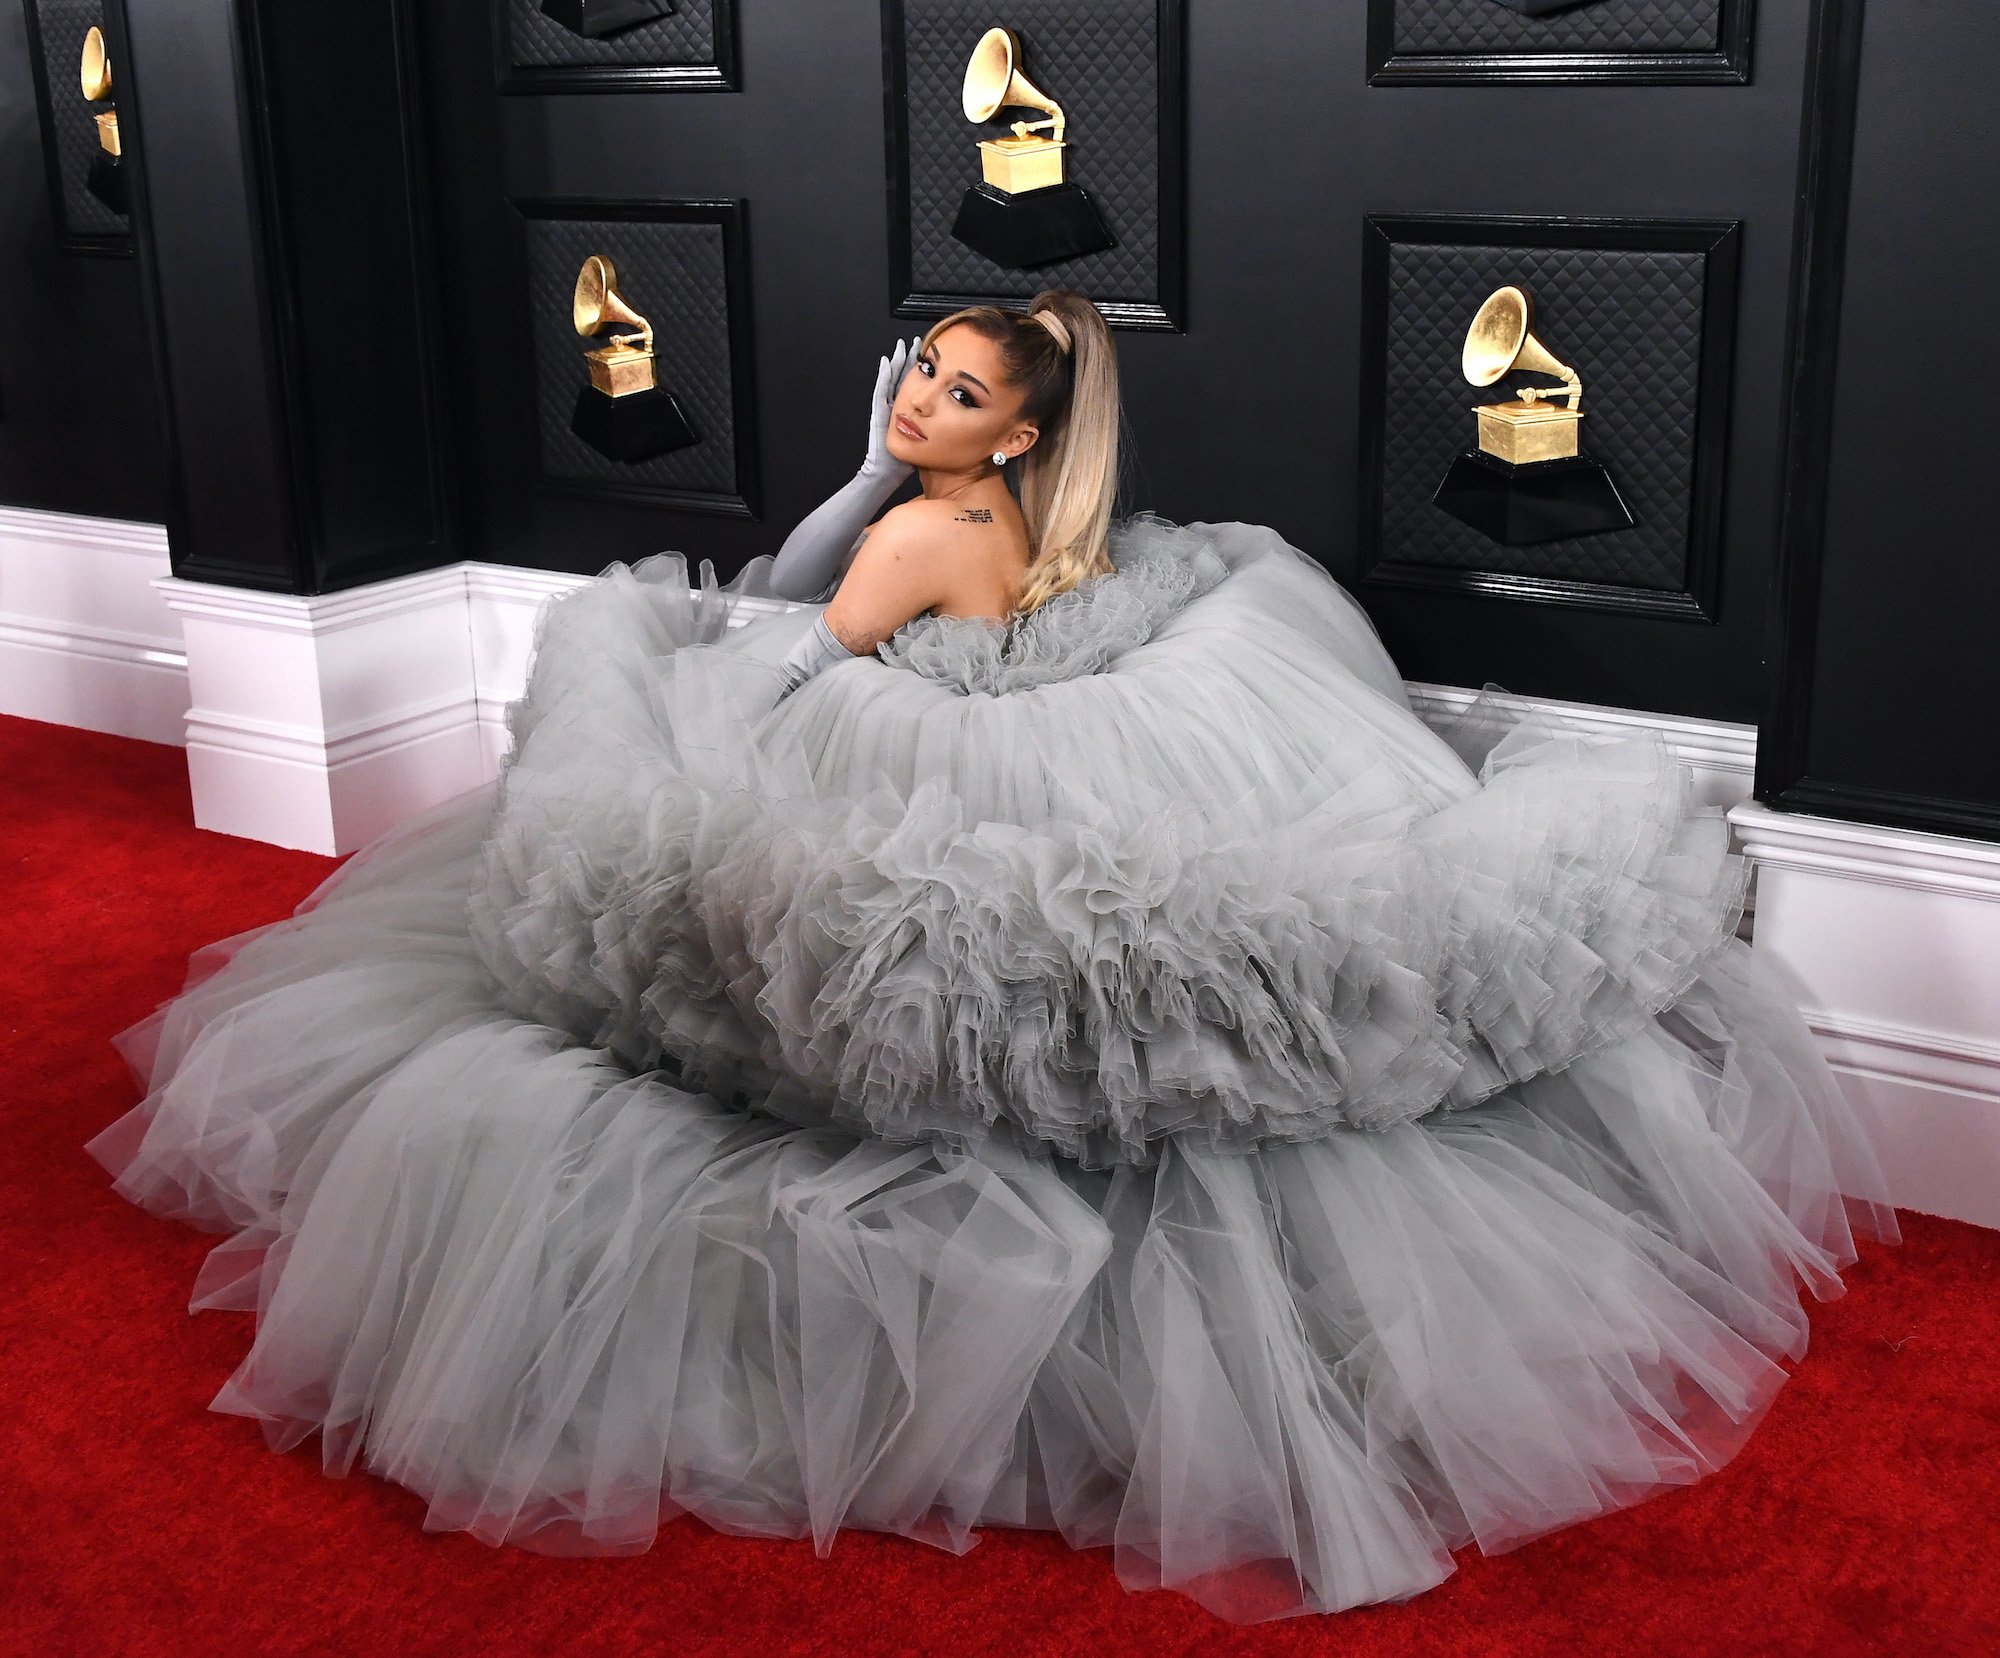 Ariana Grande crouched on a red carpet in a gray dress